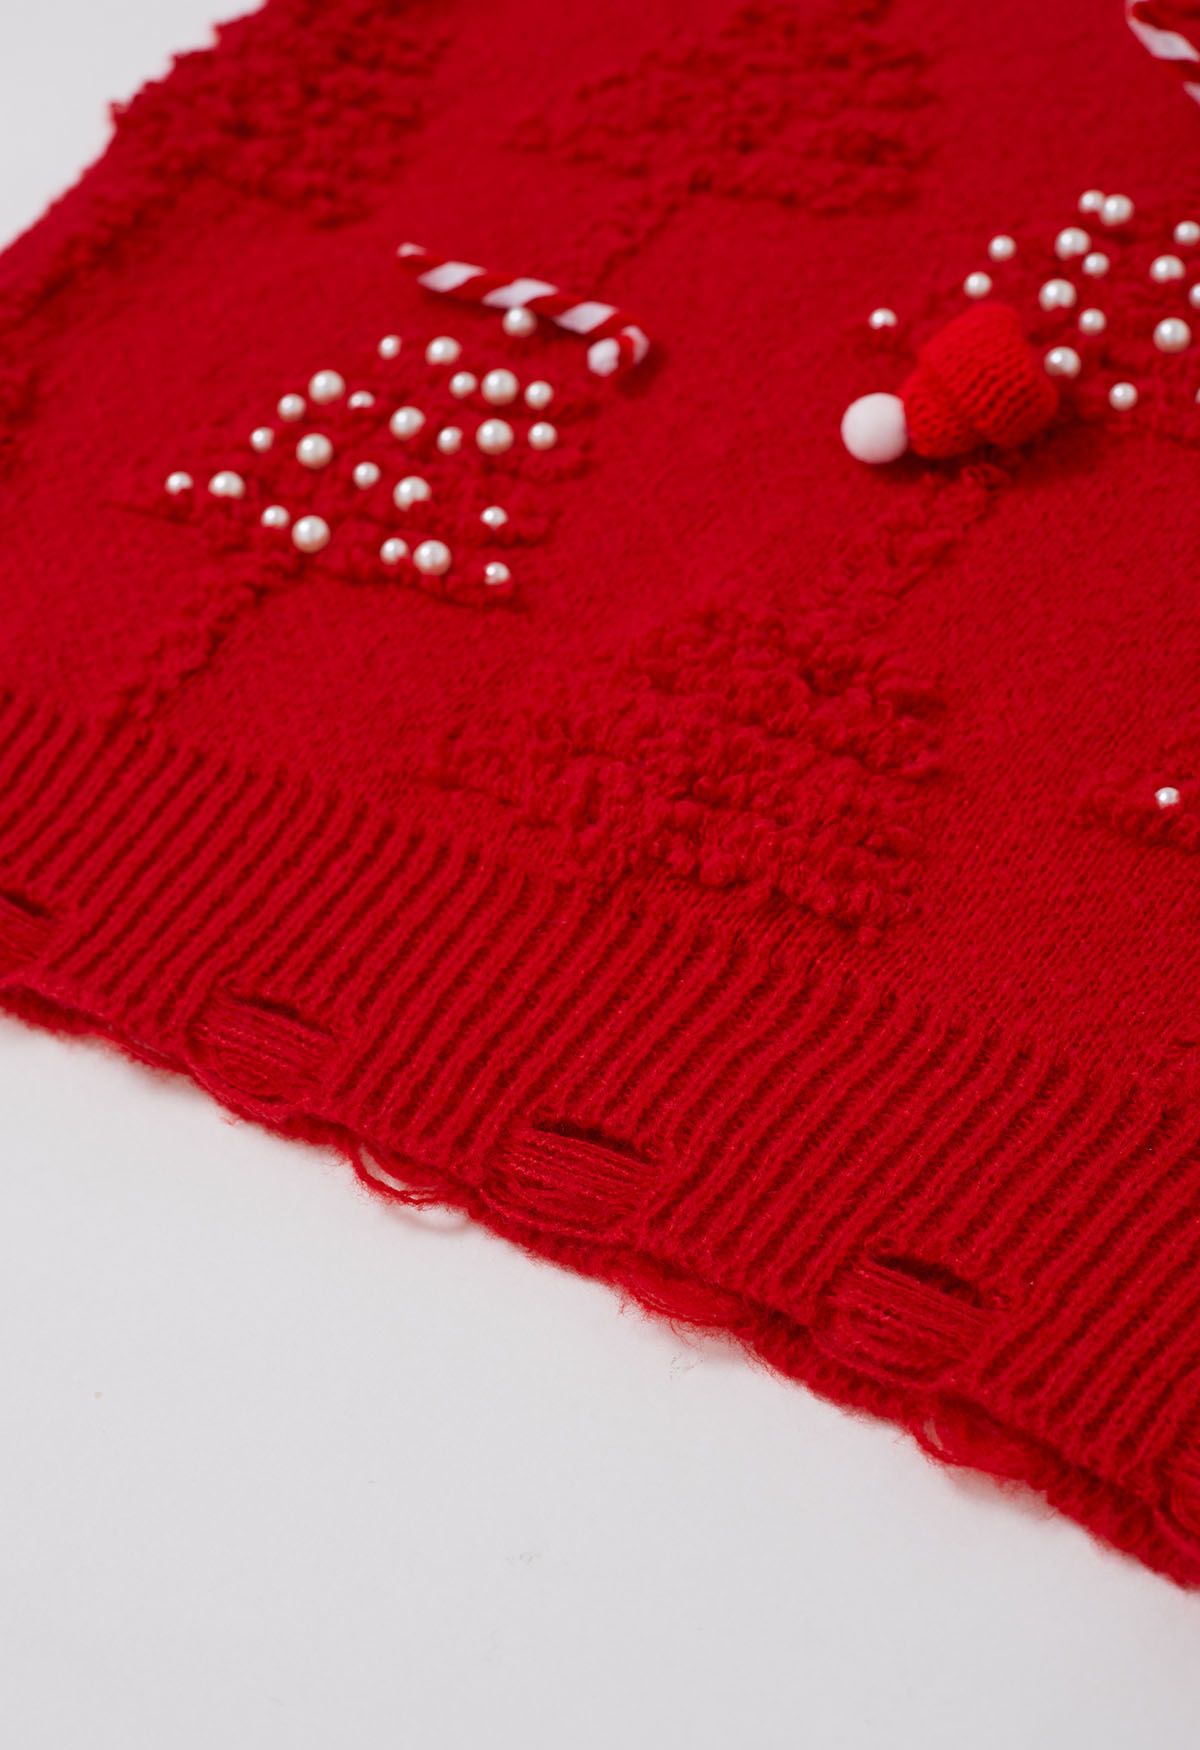 Pearl Christmas Tree Embossed Bowknot Knit Sweater in Red